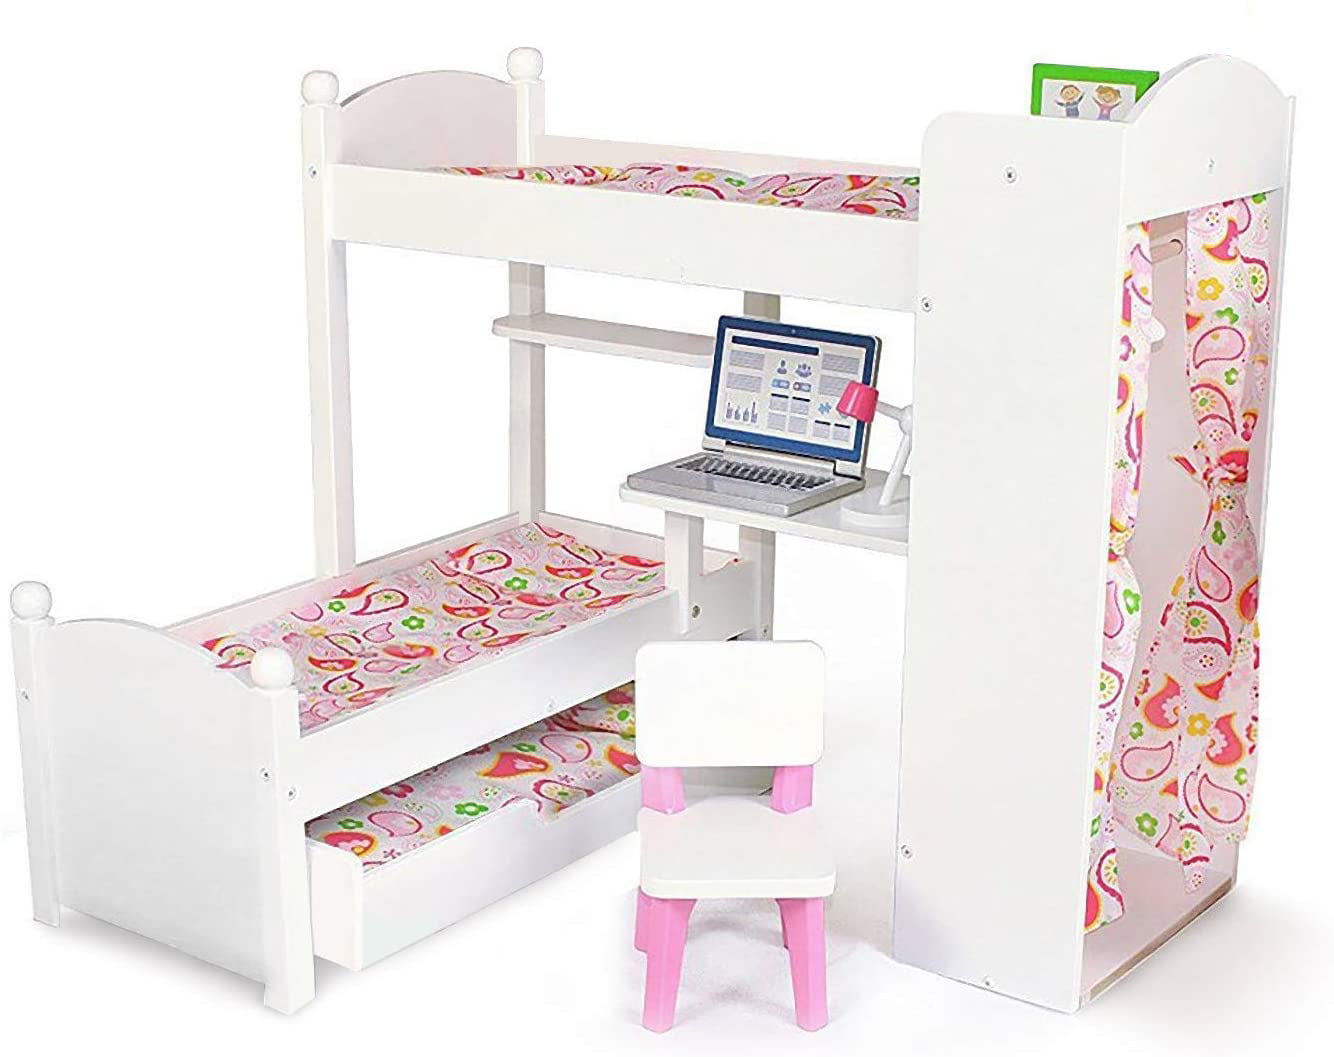 Playtime By Eimmie Wood Bunk Bed, Bitty Baby Bunk Beds